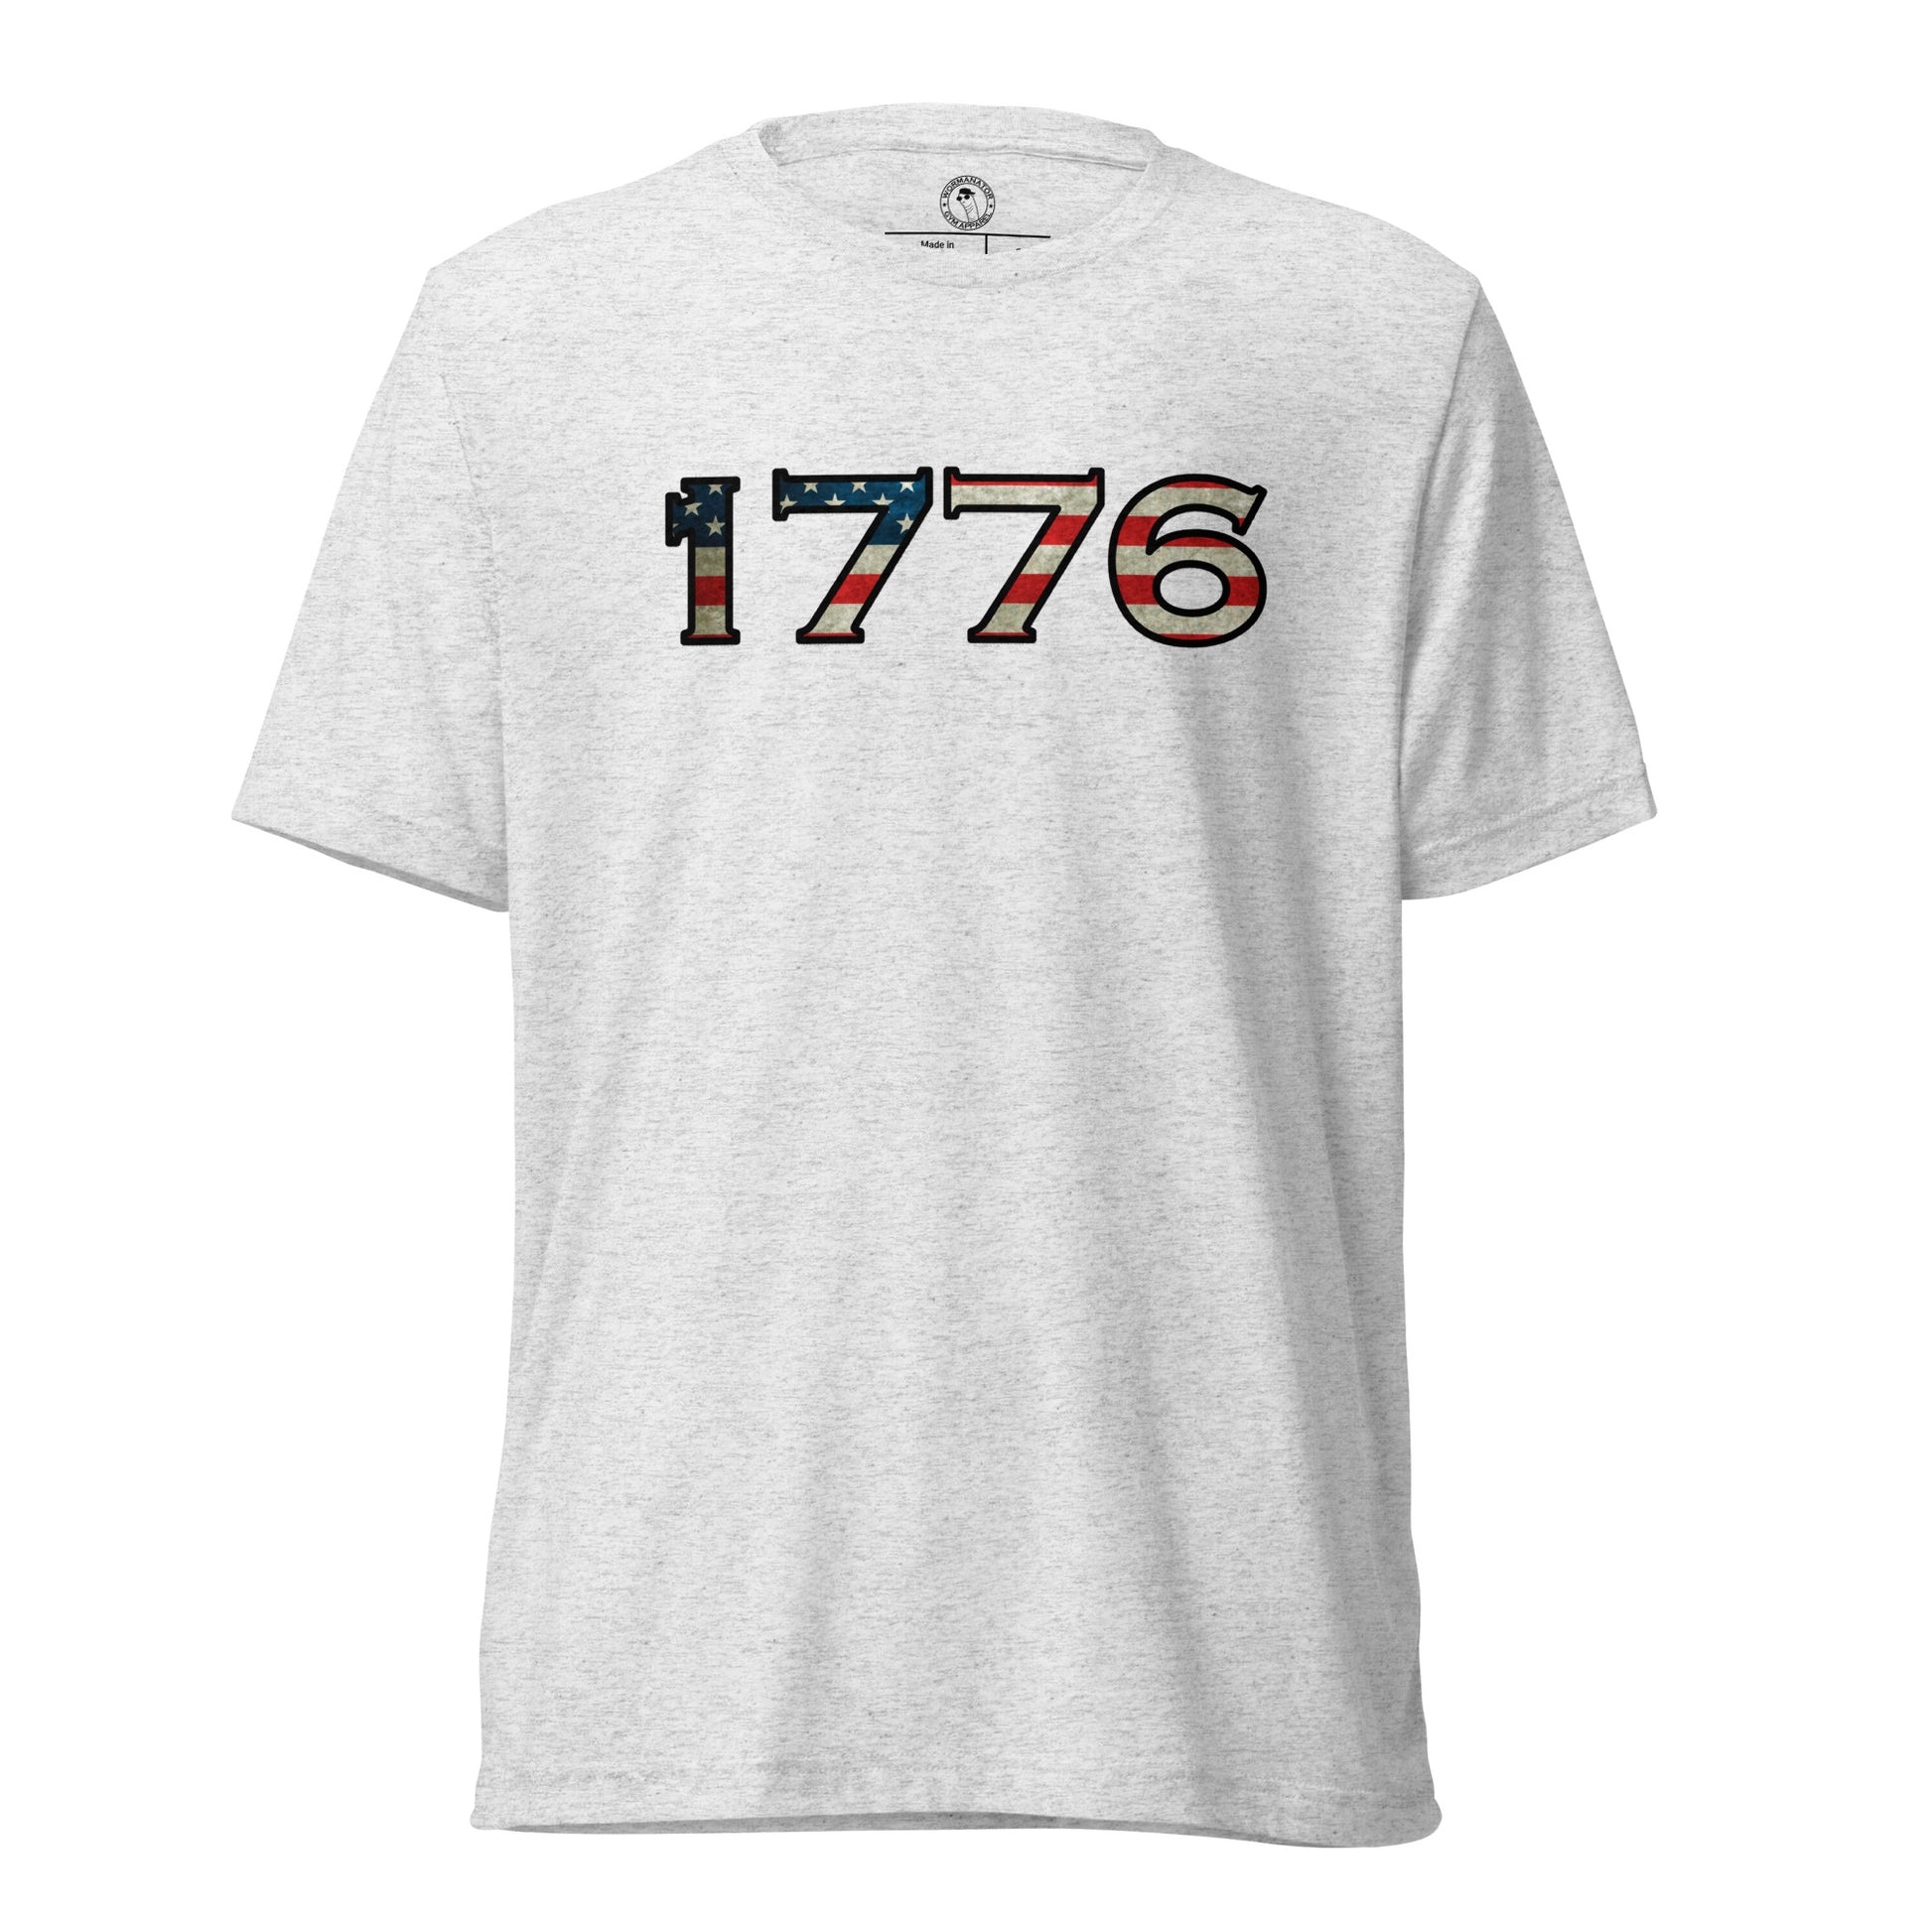 1776 T-Shirt in White Fleck Triblend